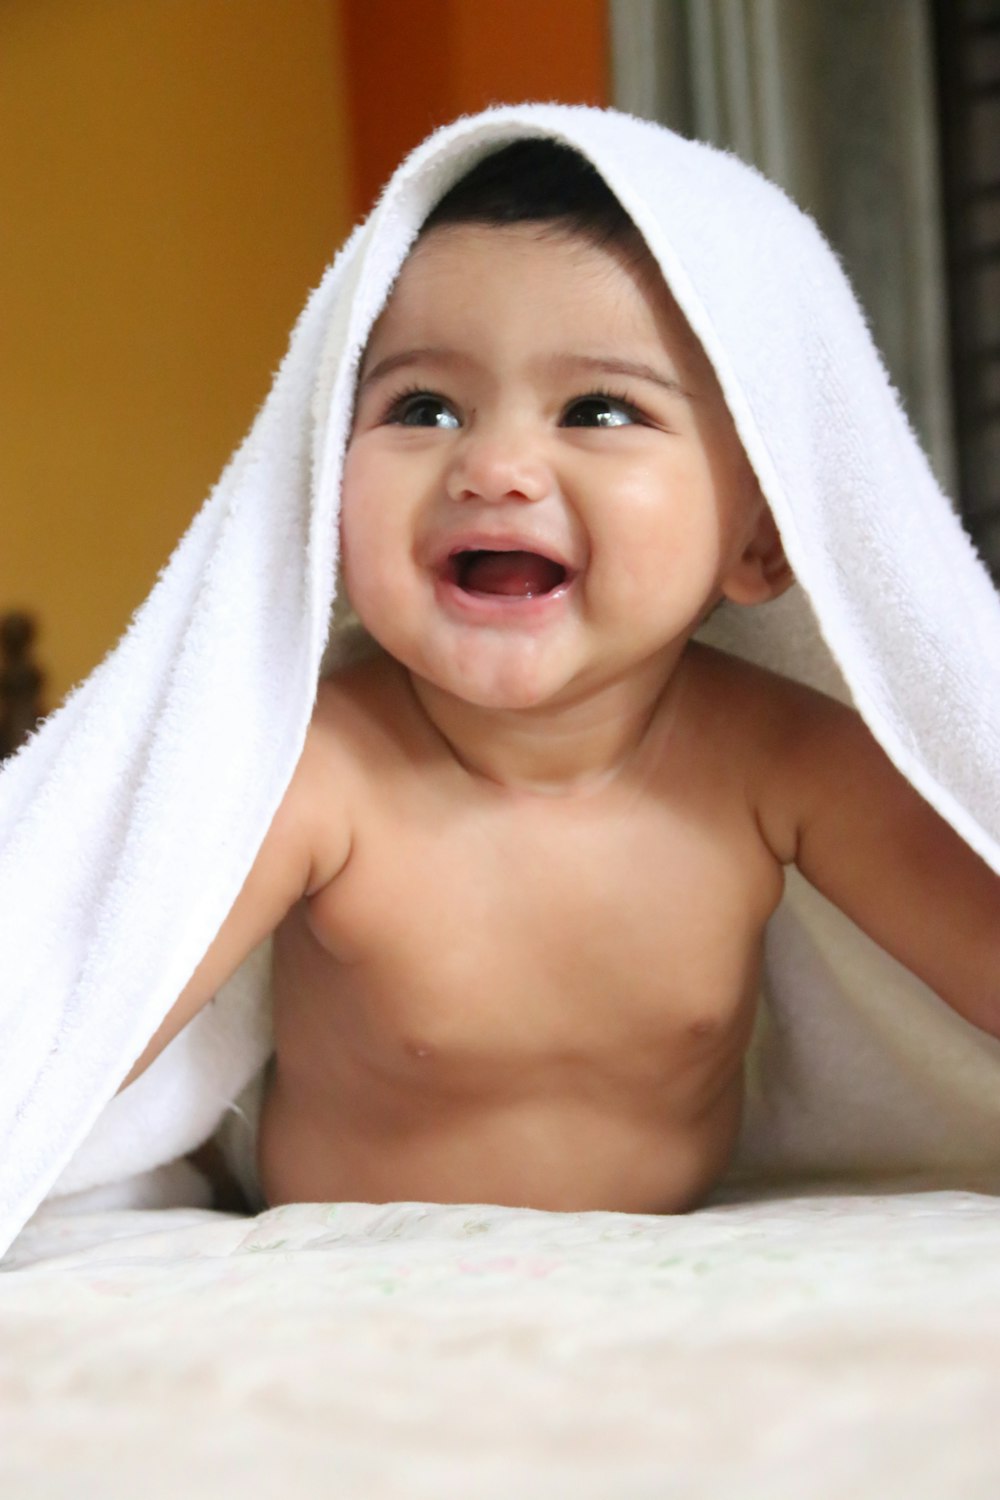 smiling baby pictures wallpapers